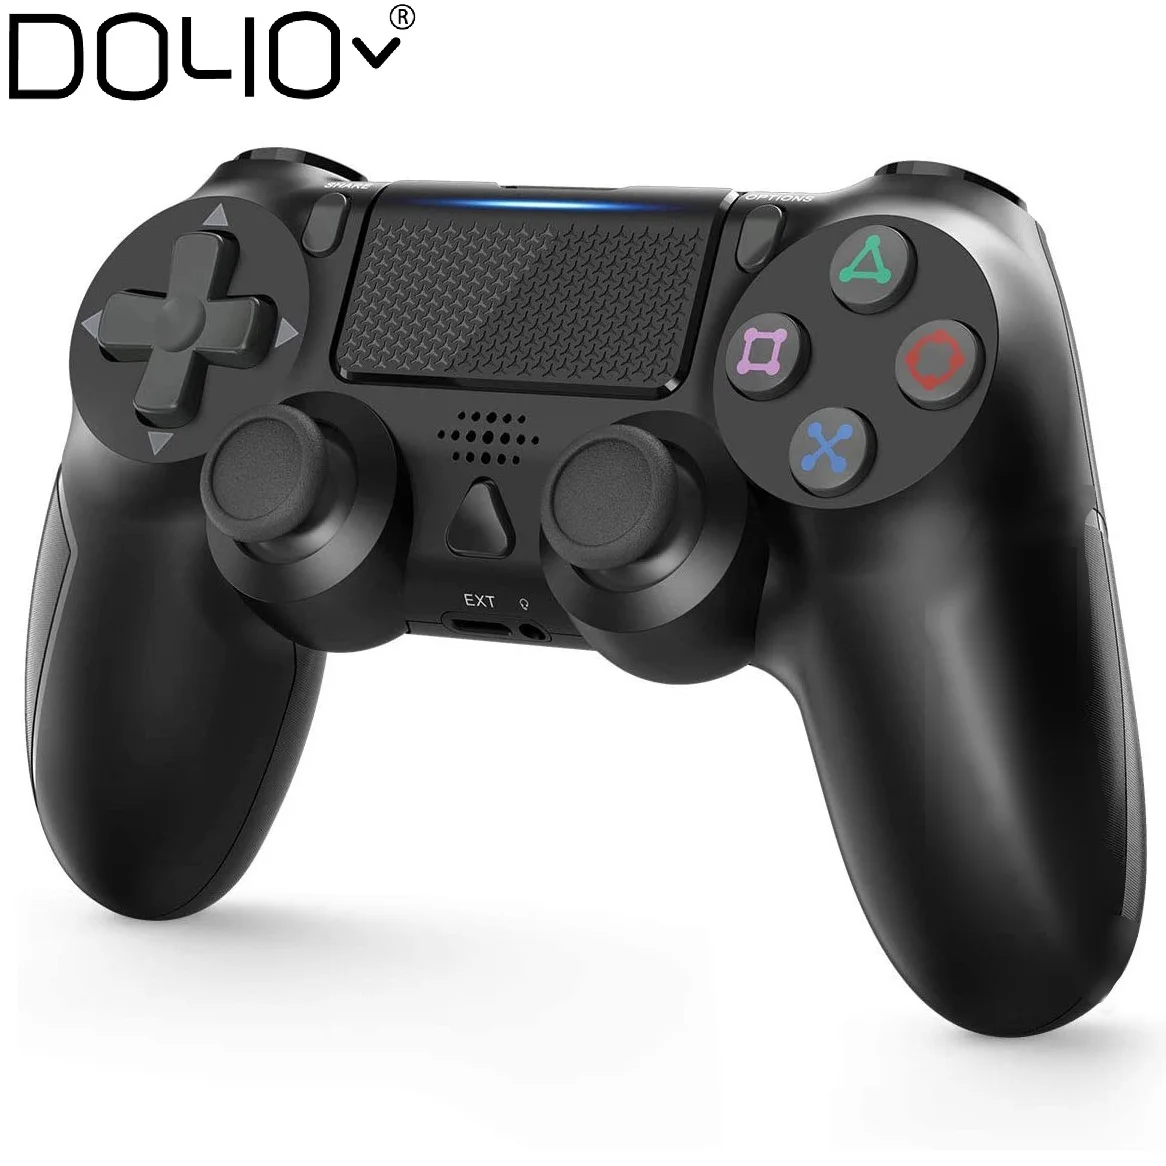 besøg Busk Hop ind Source High Quality Wholesale Bt Gaming Accessories Gamepad Ps4 Controller  Wireless Joystick Pro Controller For Pc on m.alibaba.com